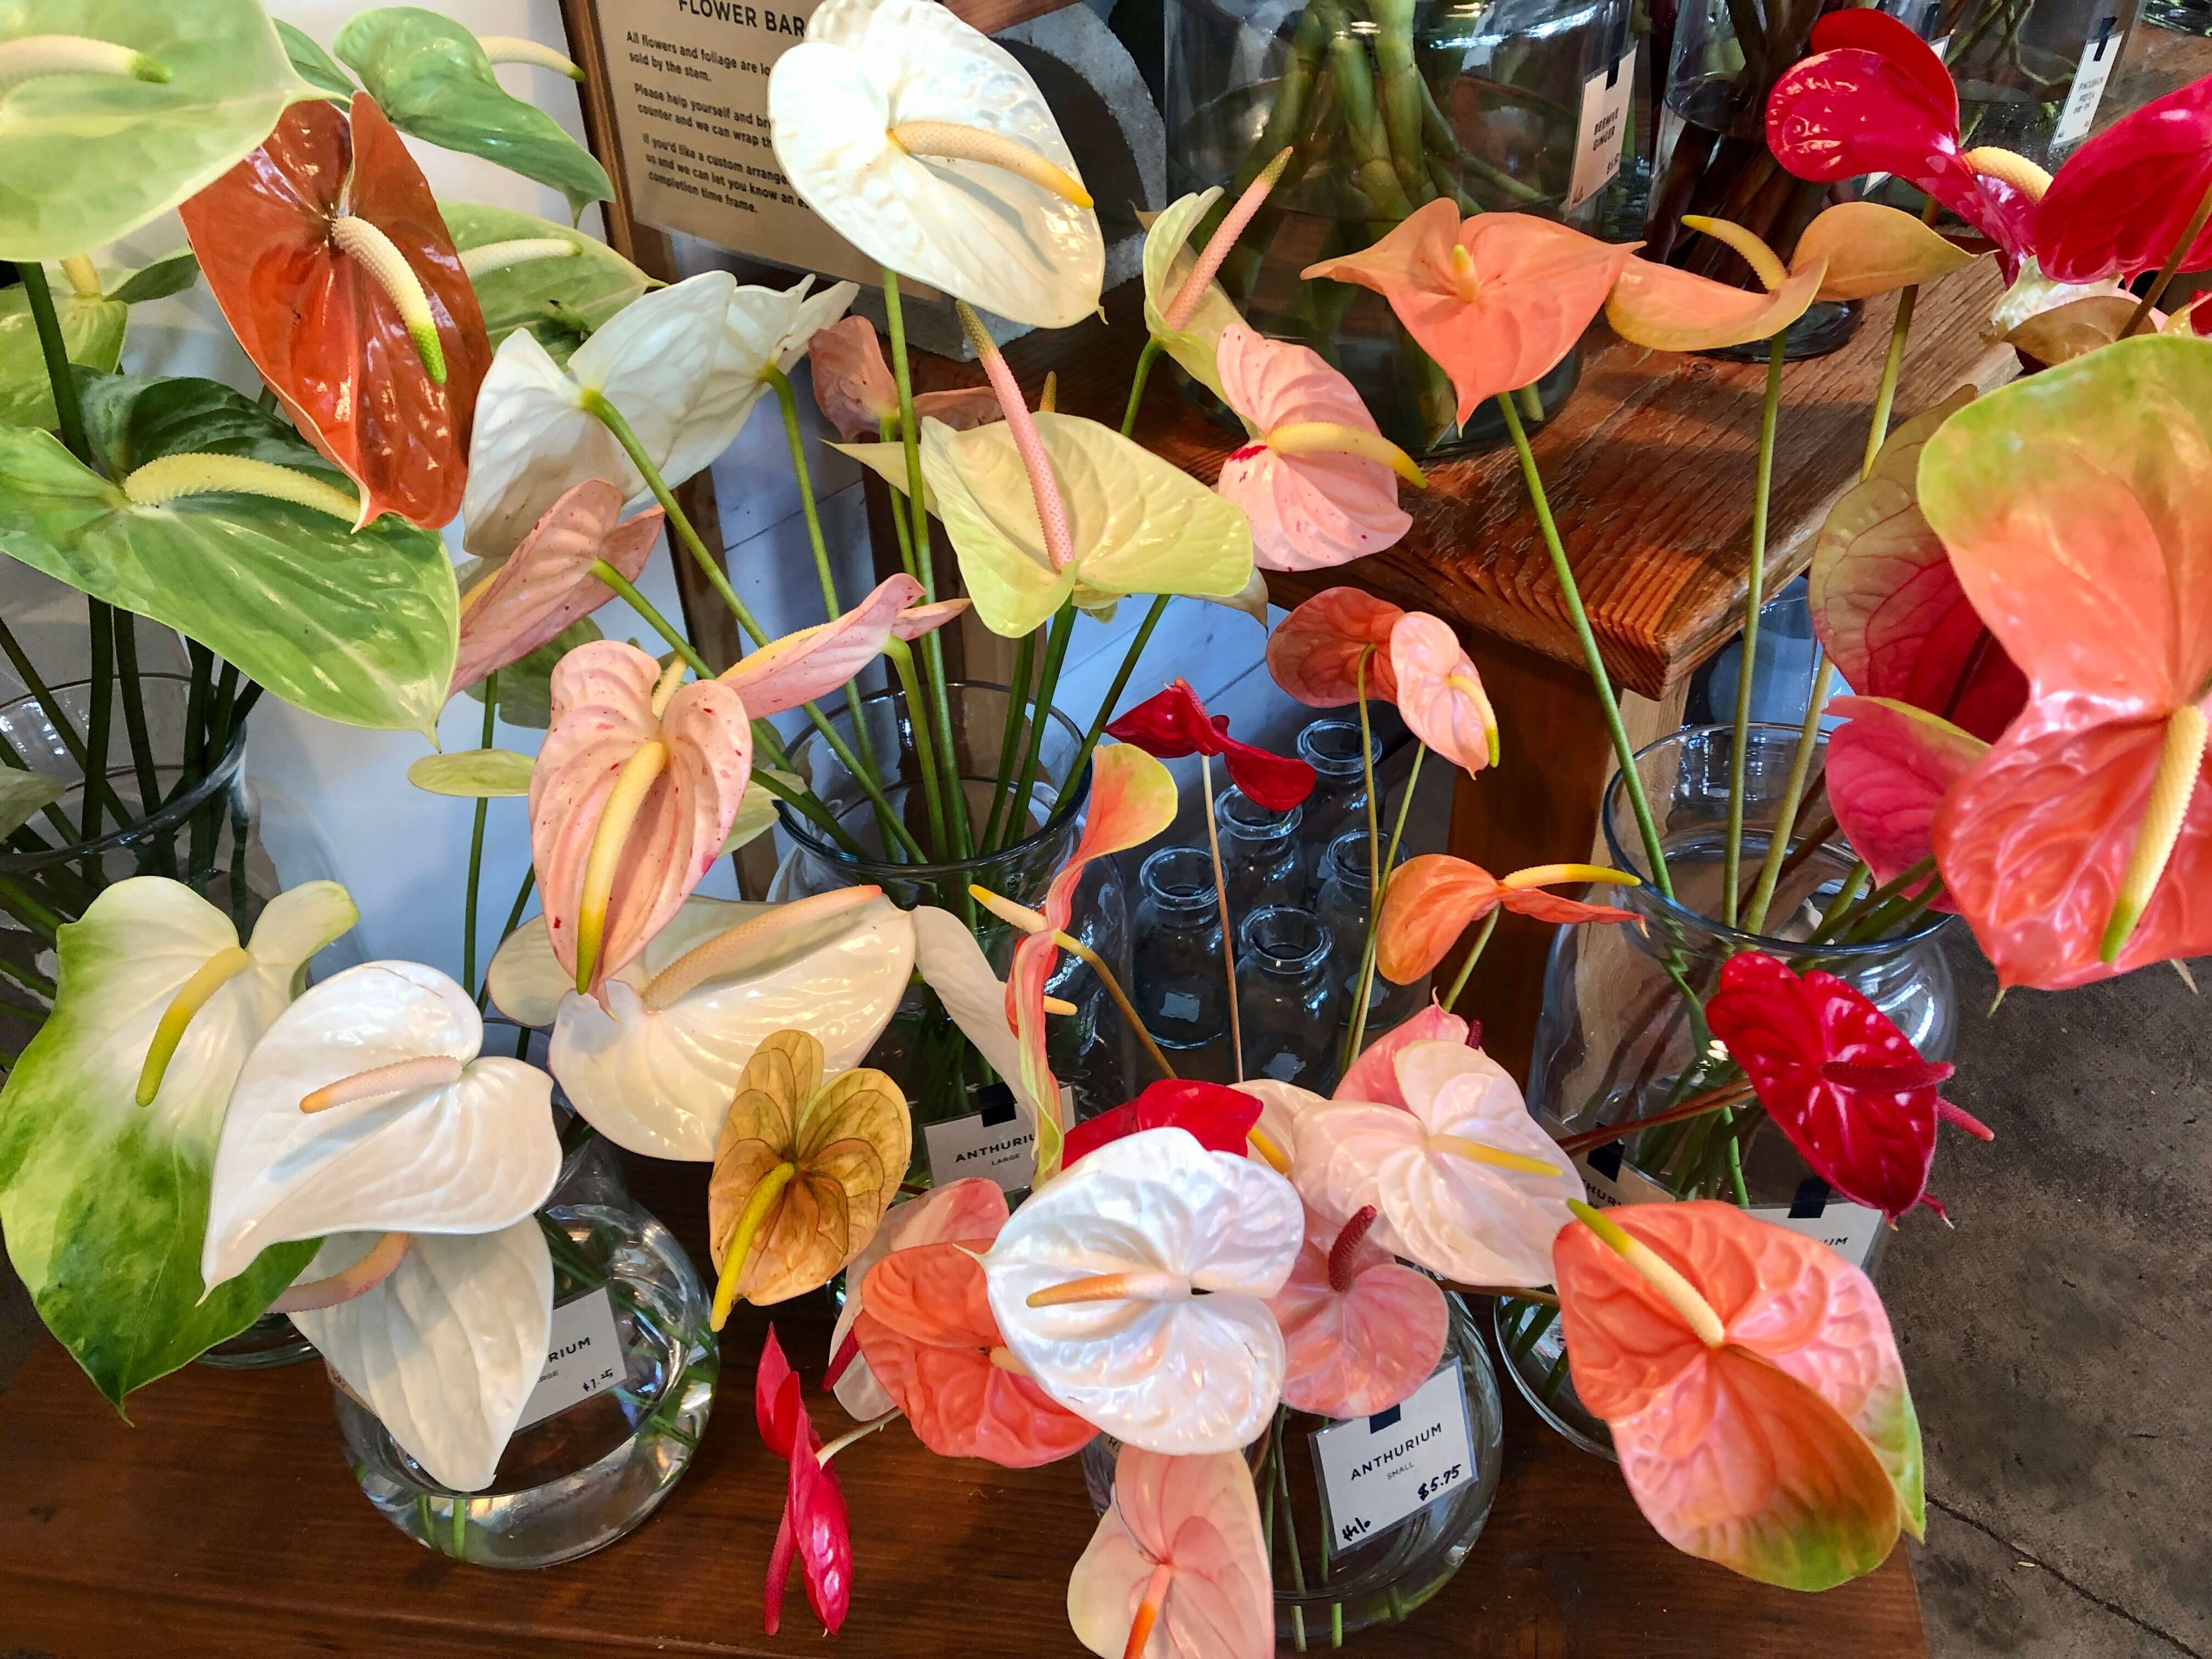 A collection of anthuriums at a flower shop